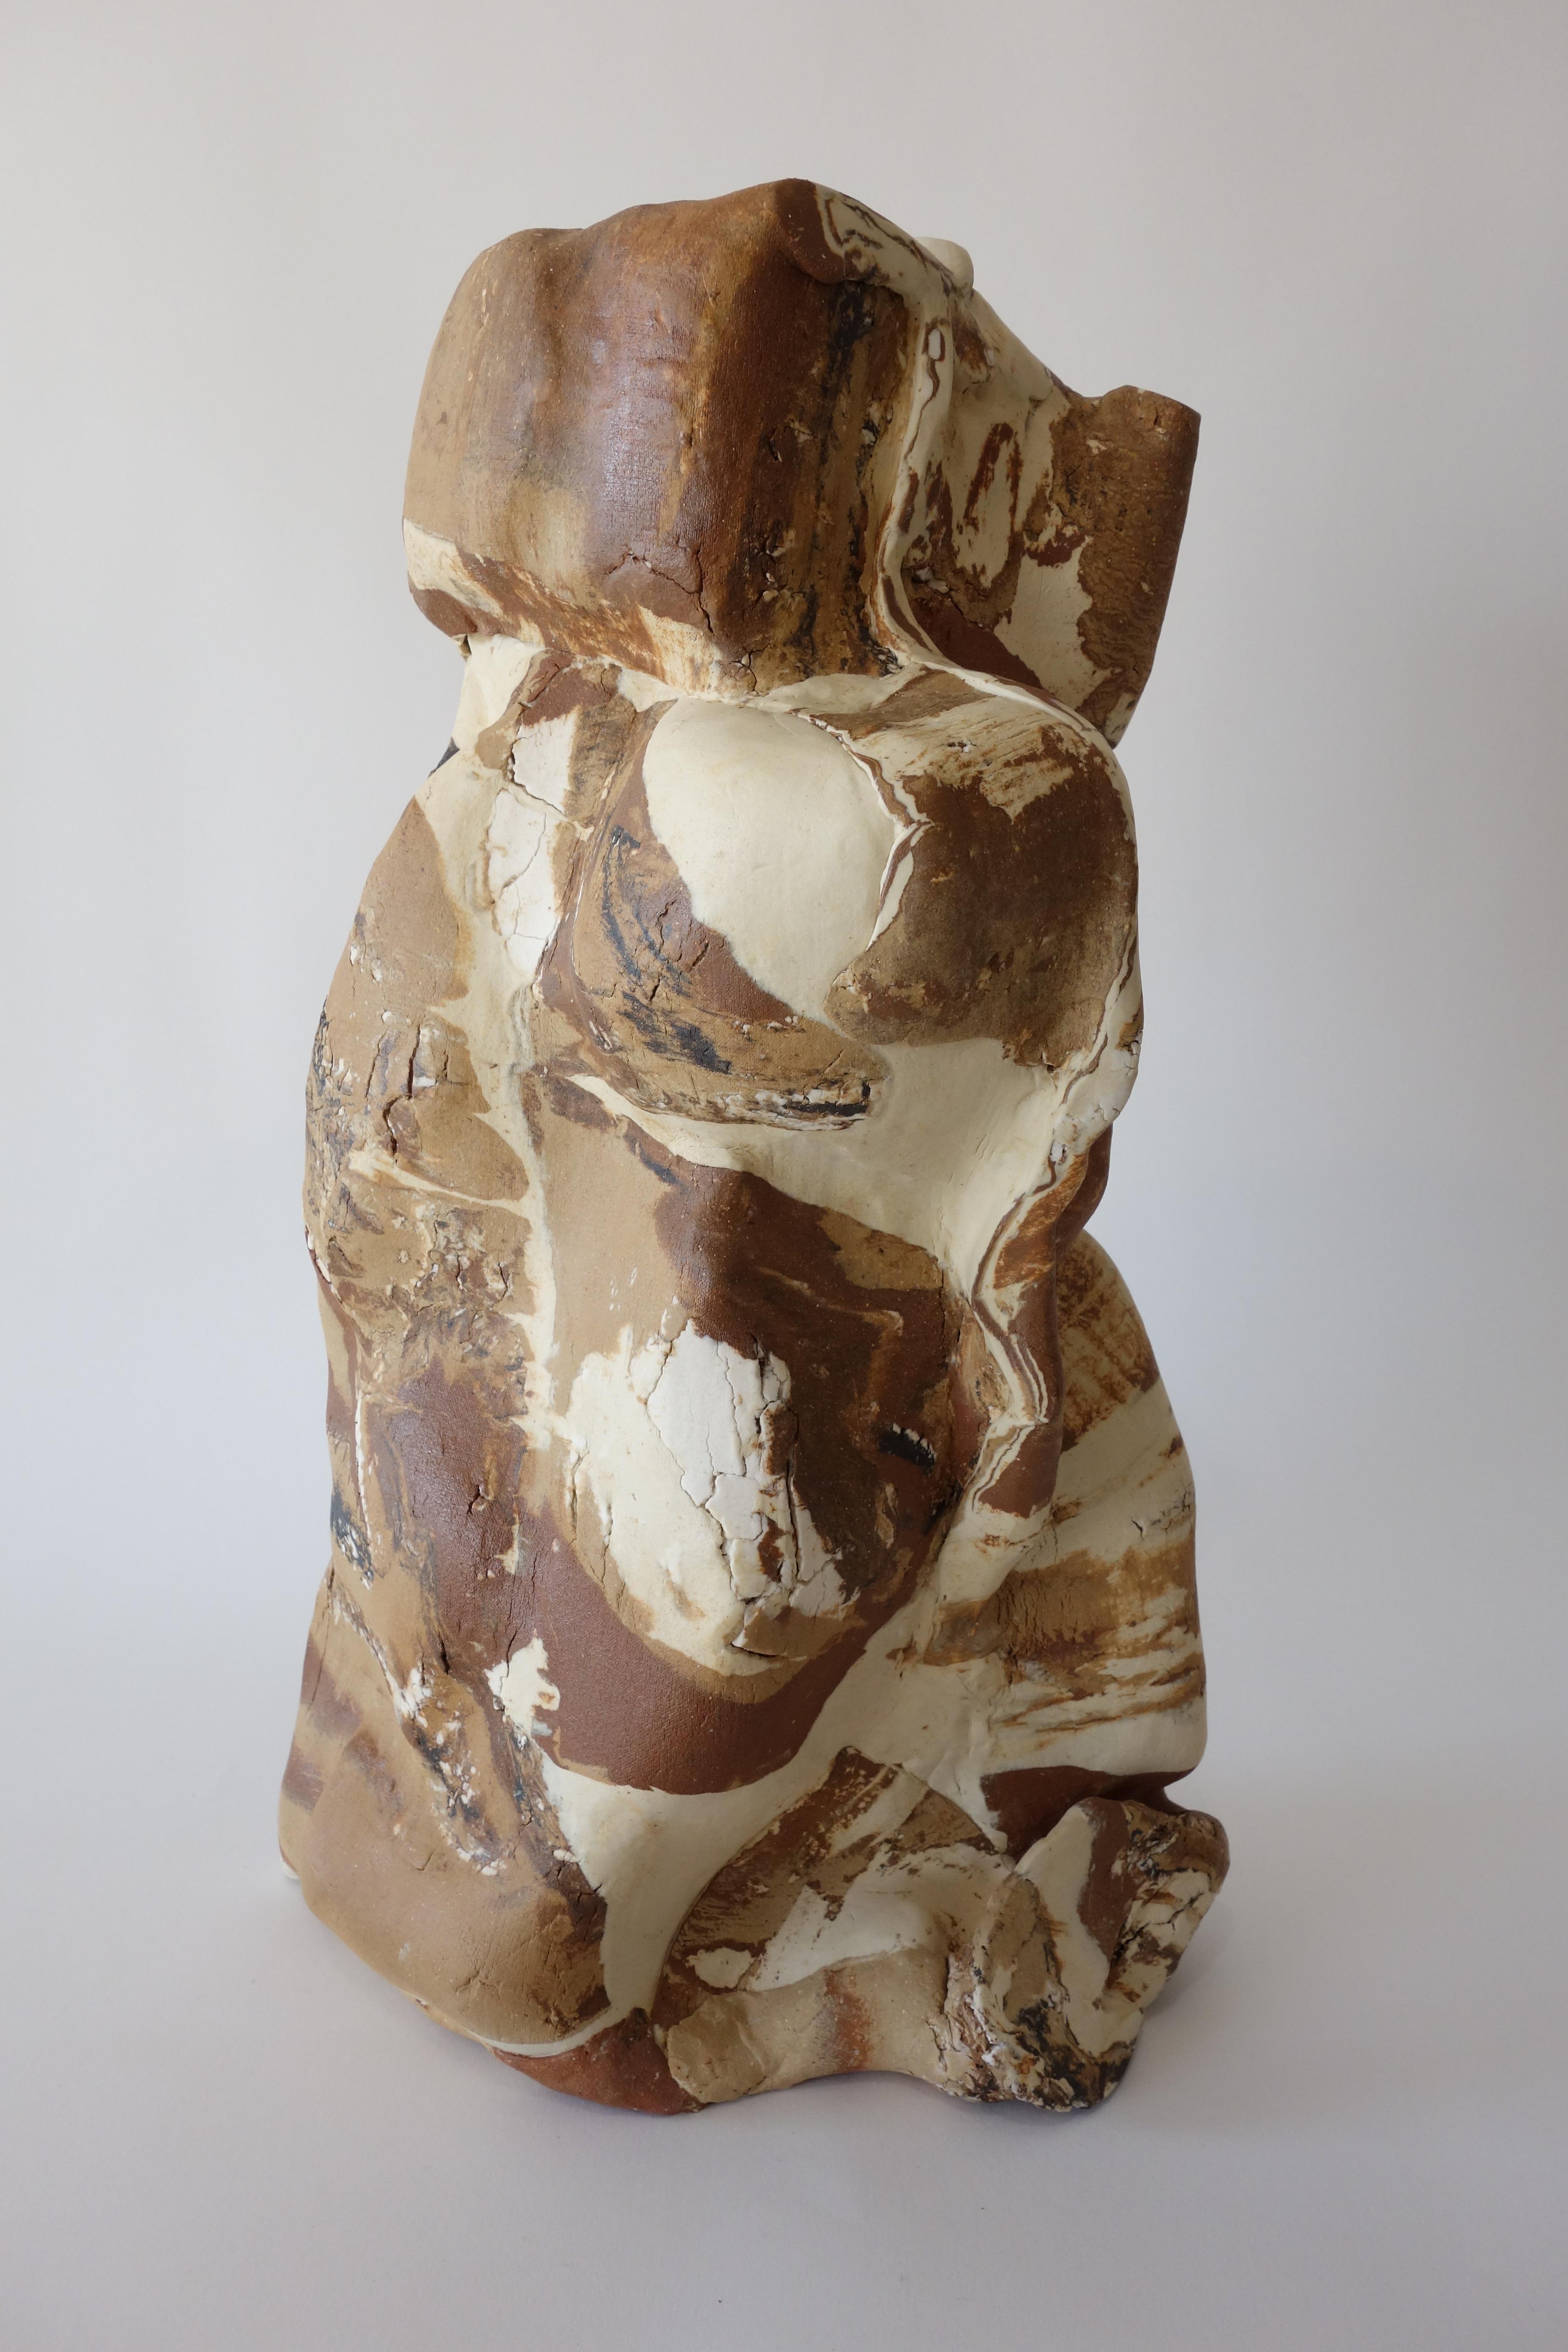 NOR Hug - Abstract Expressionist Sculpture by Anna Bush Crews